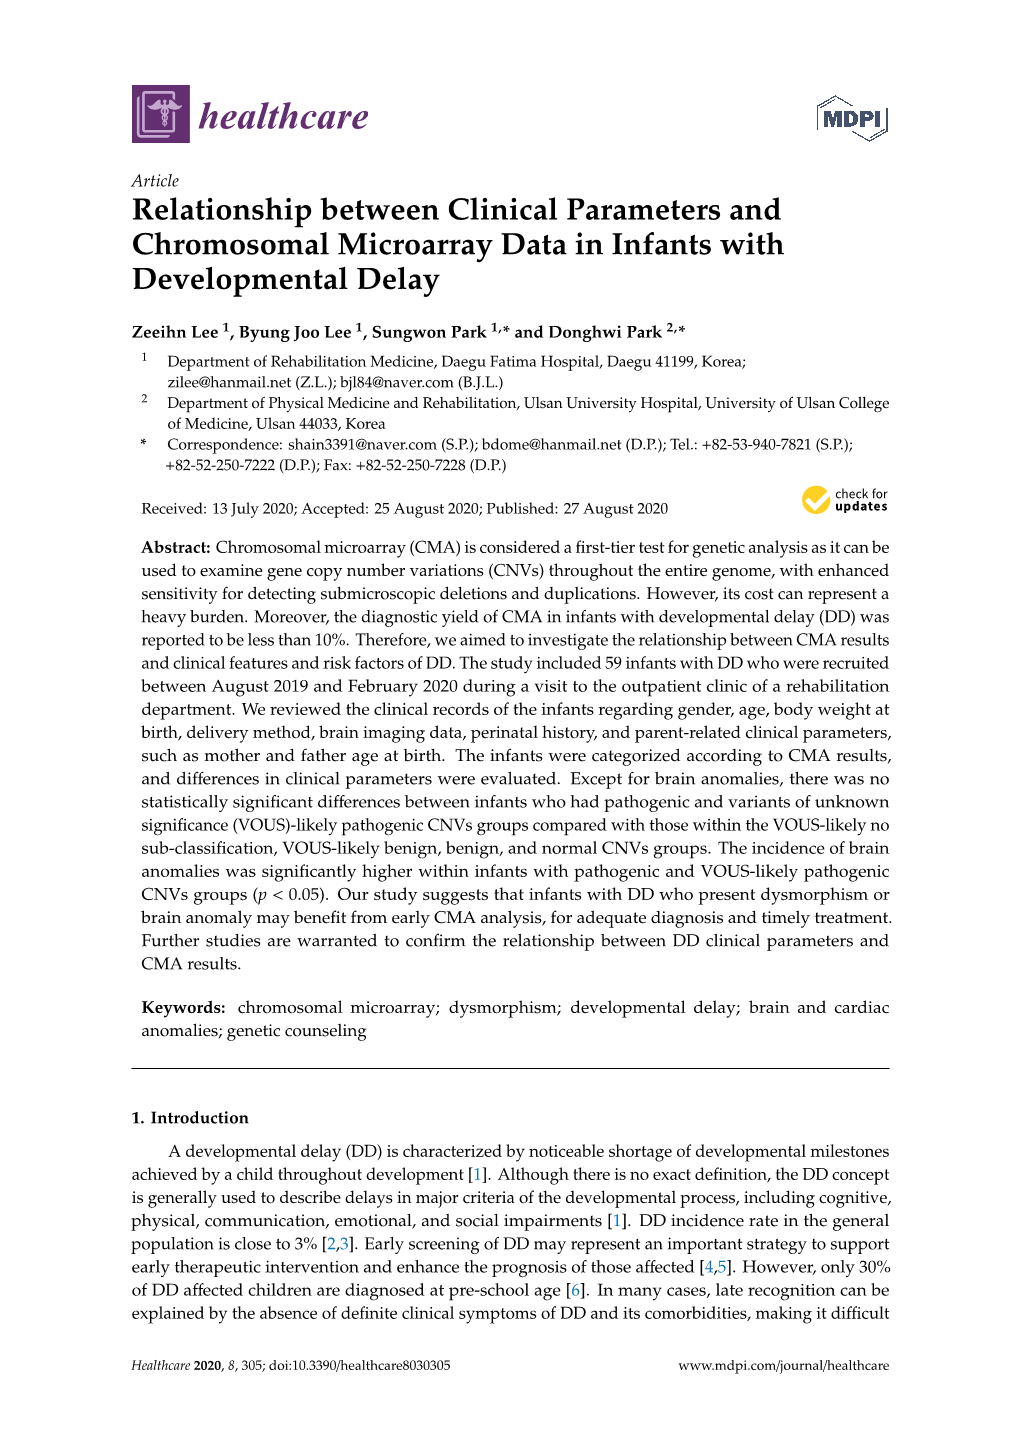 Relationship Between Clinical Parameters and Chromosomal Microarray Data in Infants with Developmental Delay